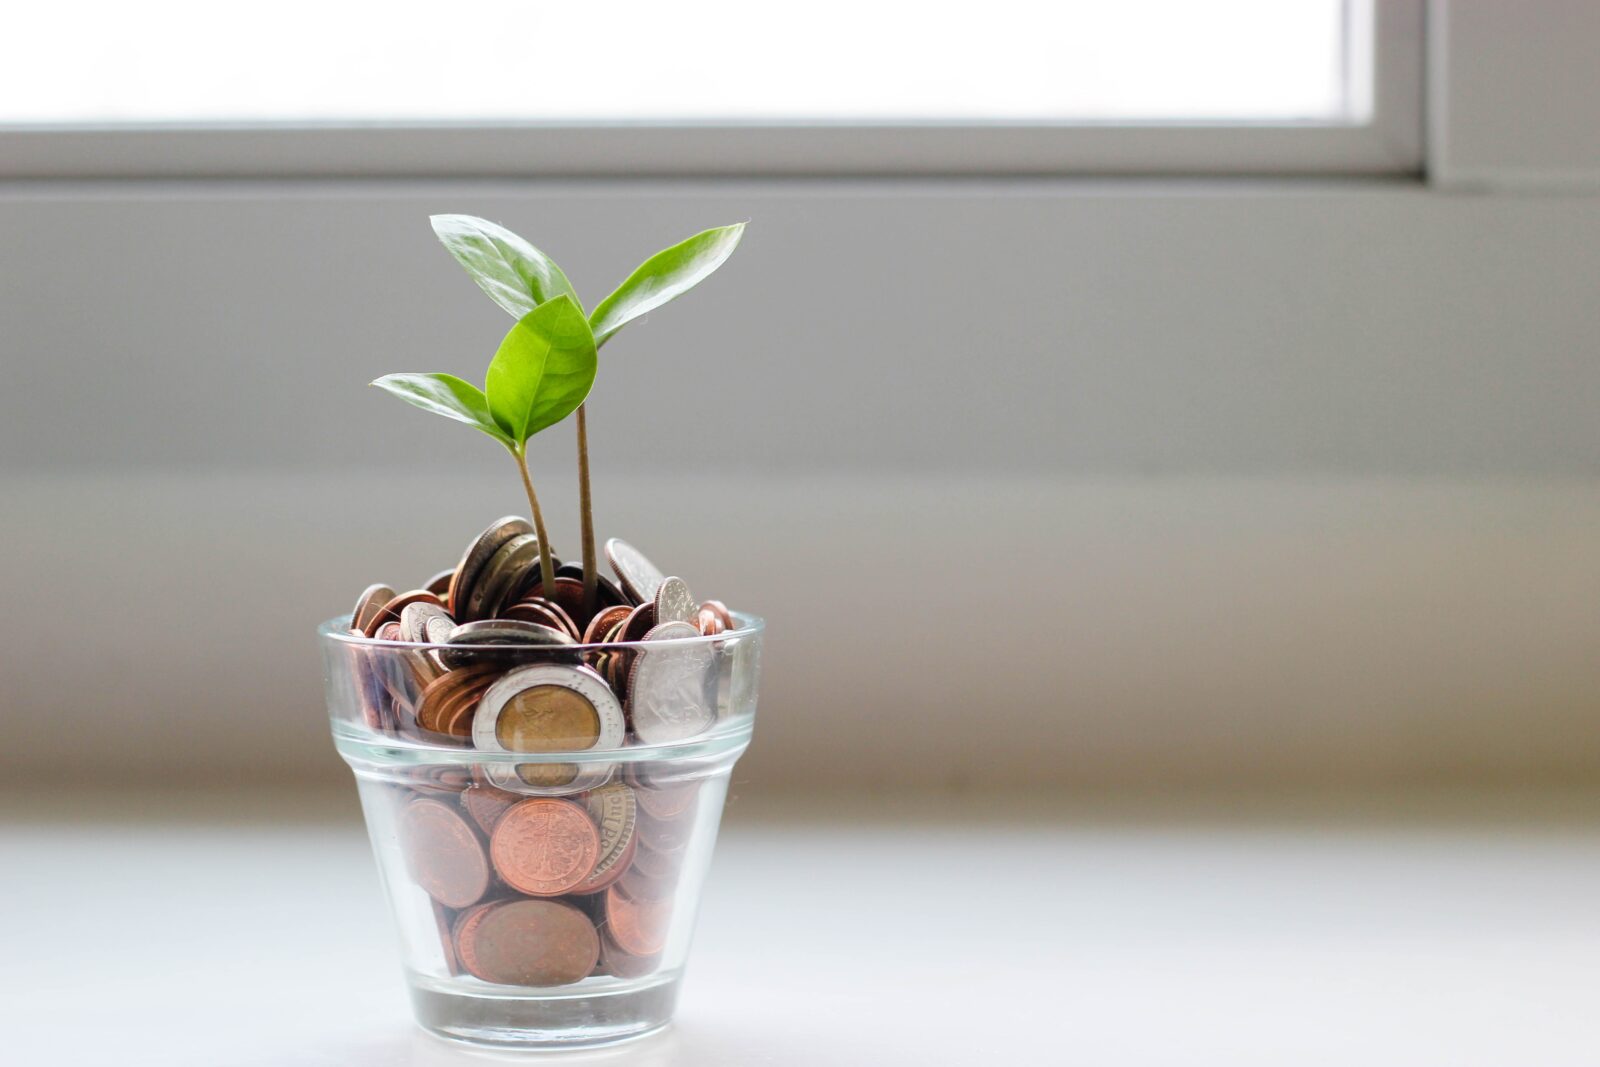 Grow Money. Image shows a class full of coins with plant seedlings growing out of the coins.